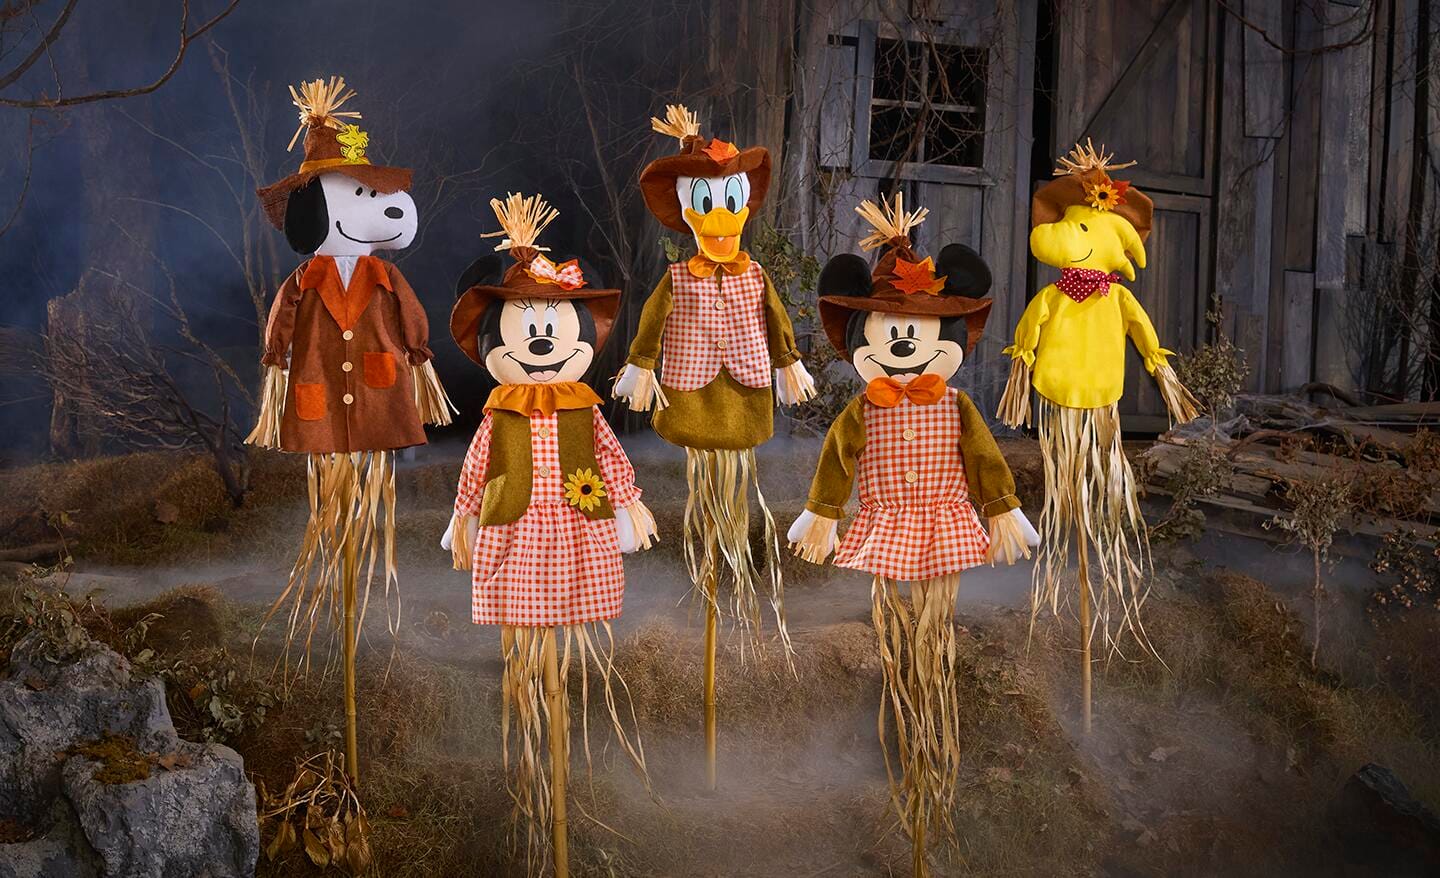 Yard decor of scarecrows with faces of Disney and Peanuts characters.